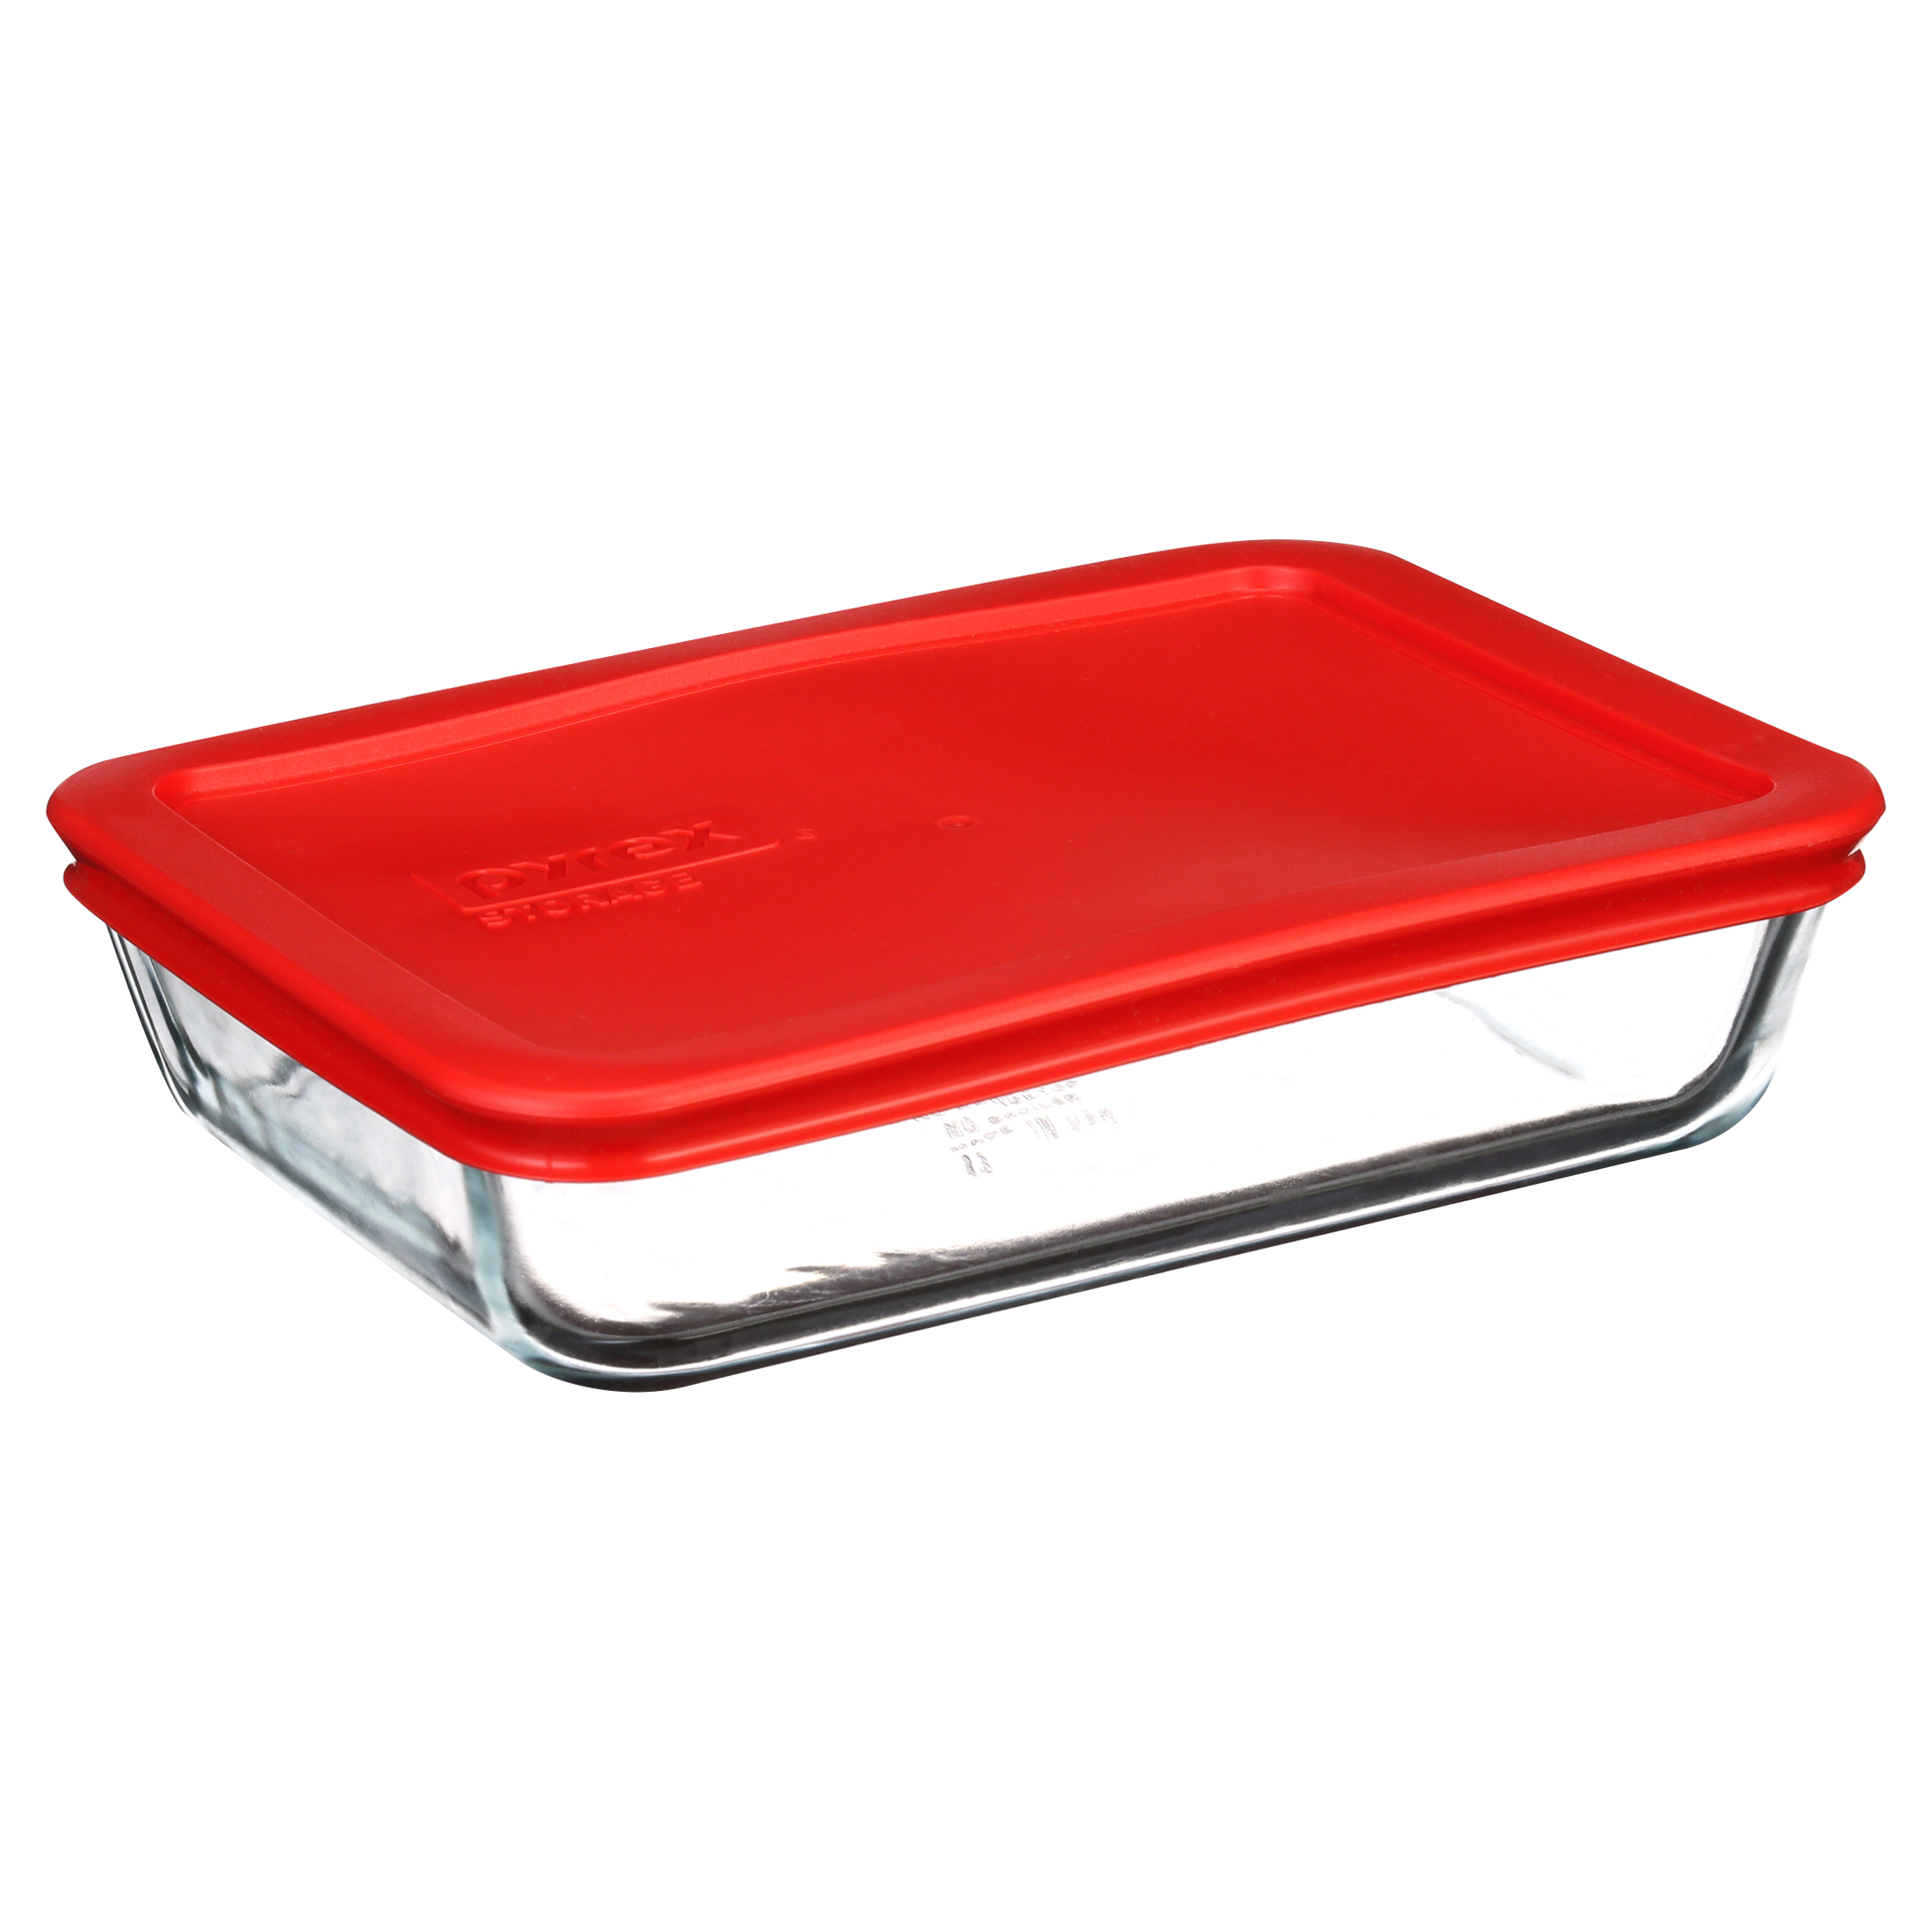 Pyrex® Storage Plus Glass Storage Container, Red, 14 Piece - image 3 of 11